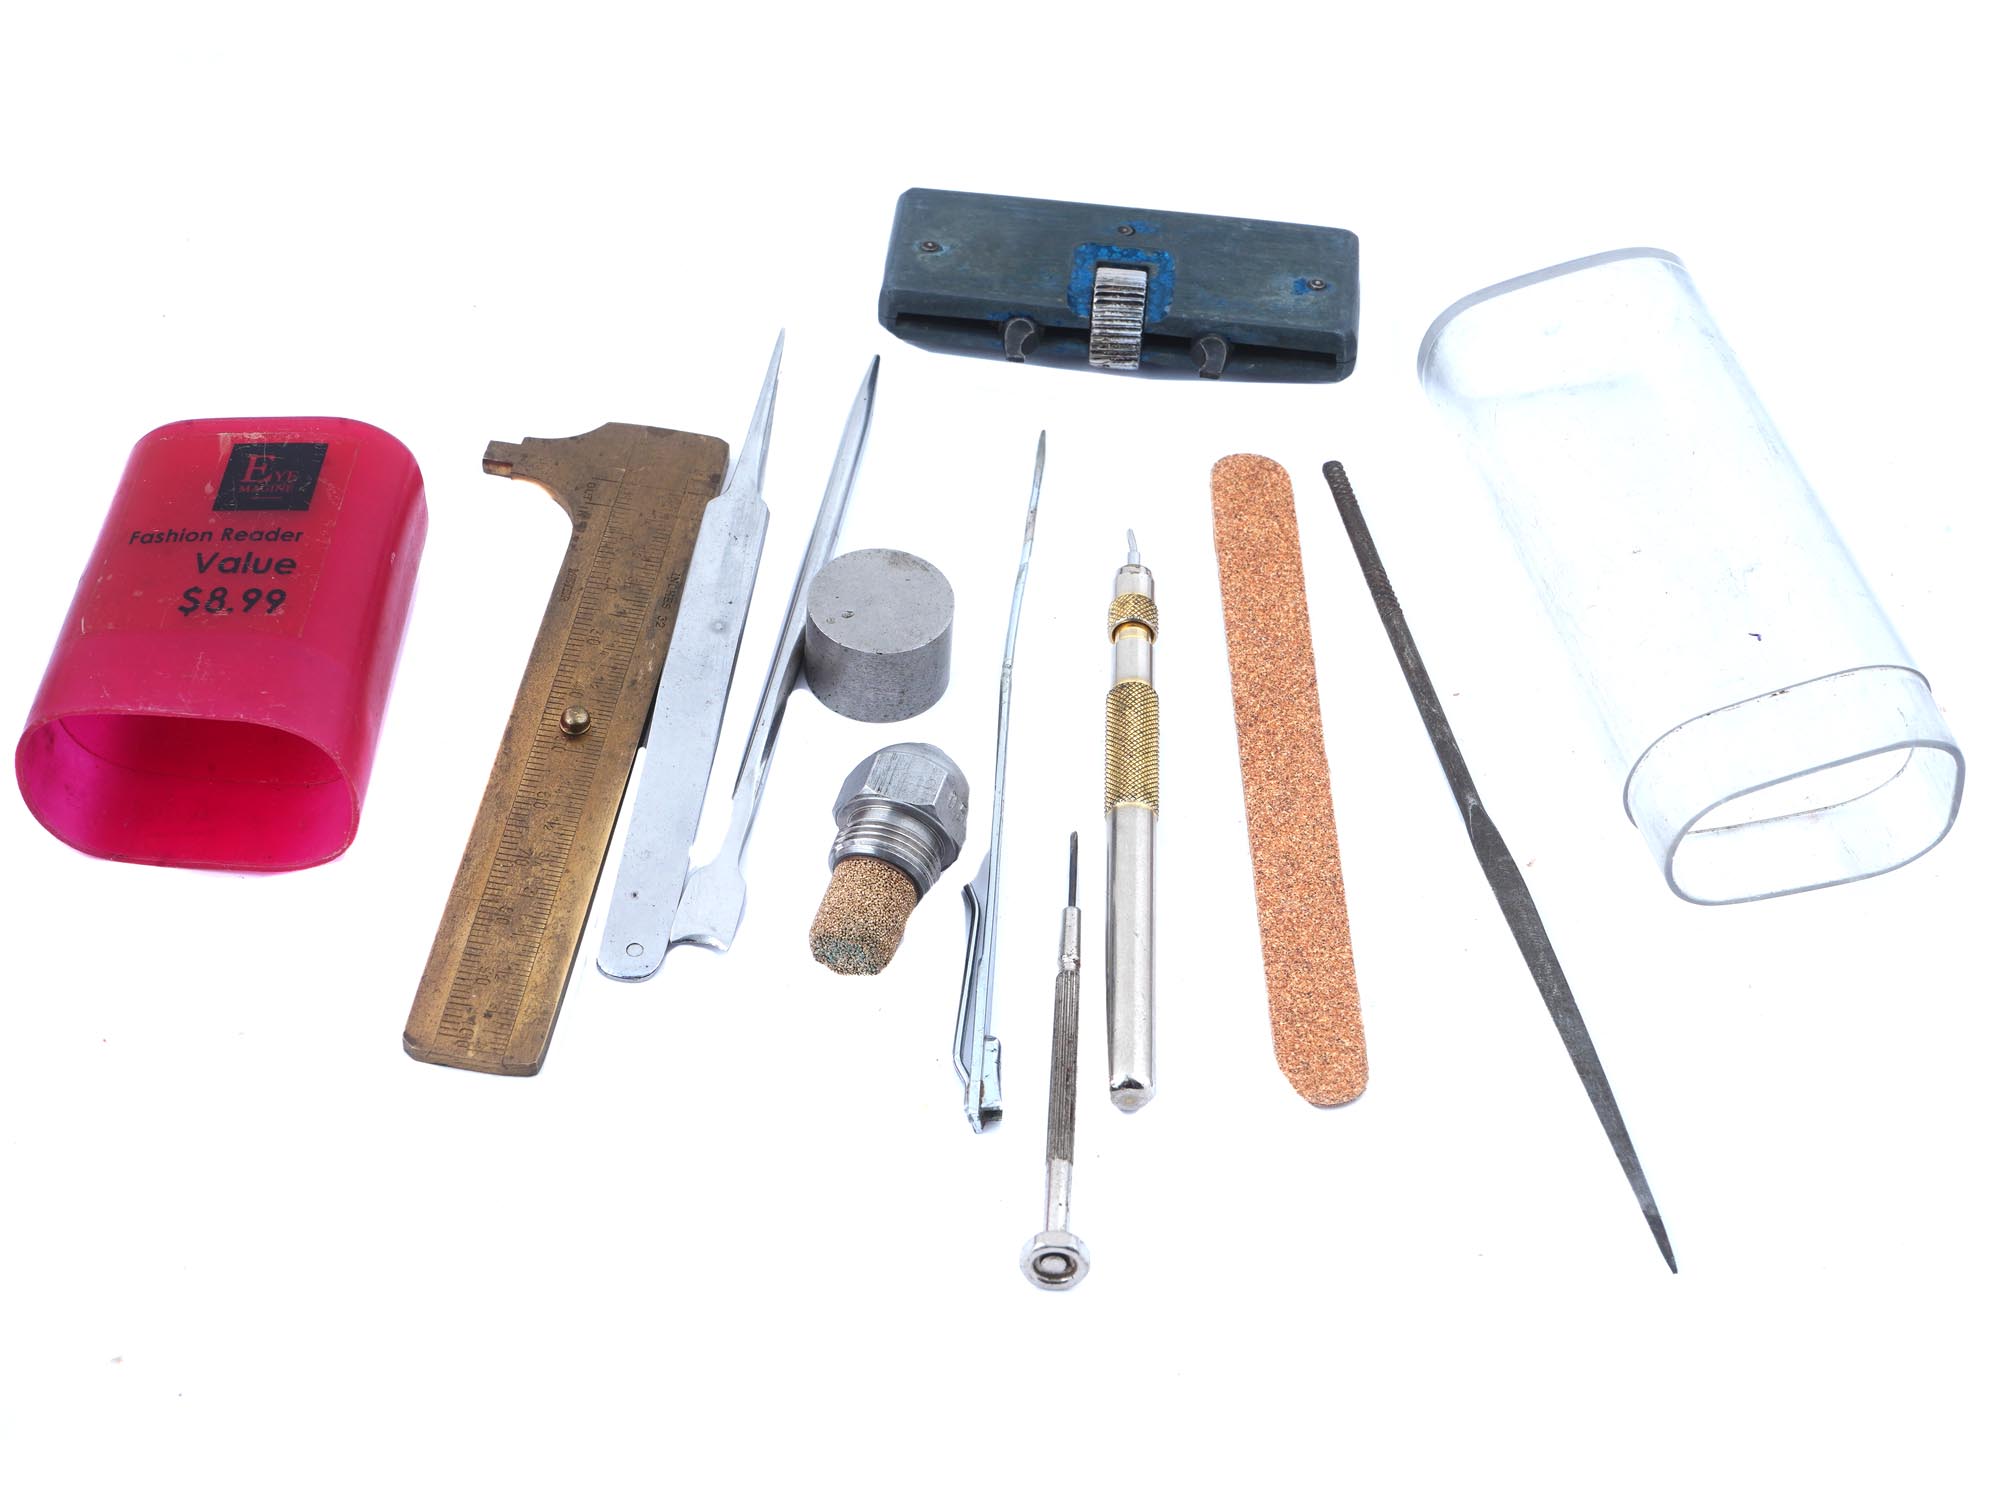 WATCH REPAIR TOOLS SCREWDRIVERS AND WATCH CASE OPENER PIC-3